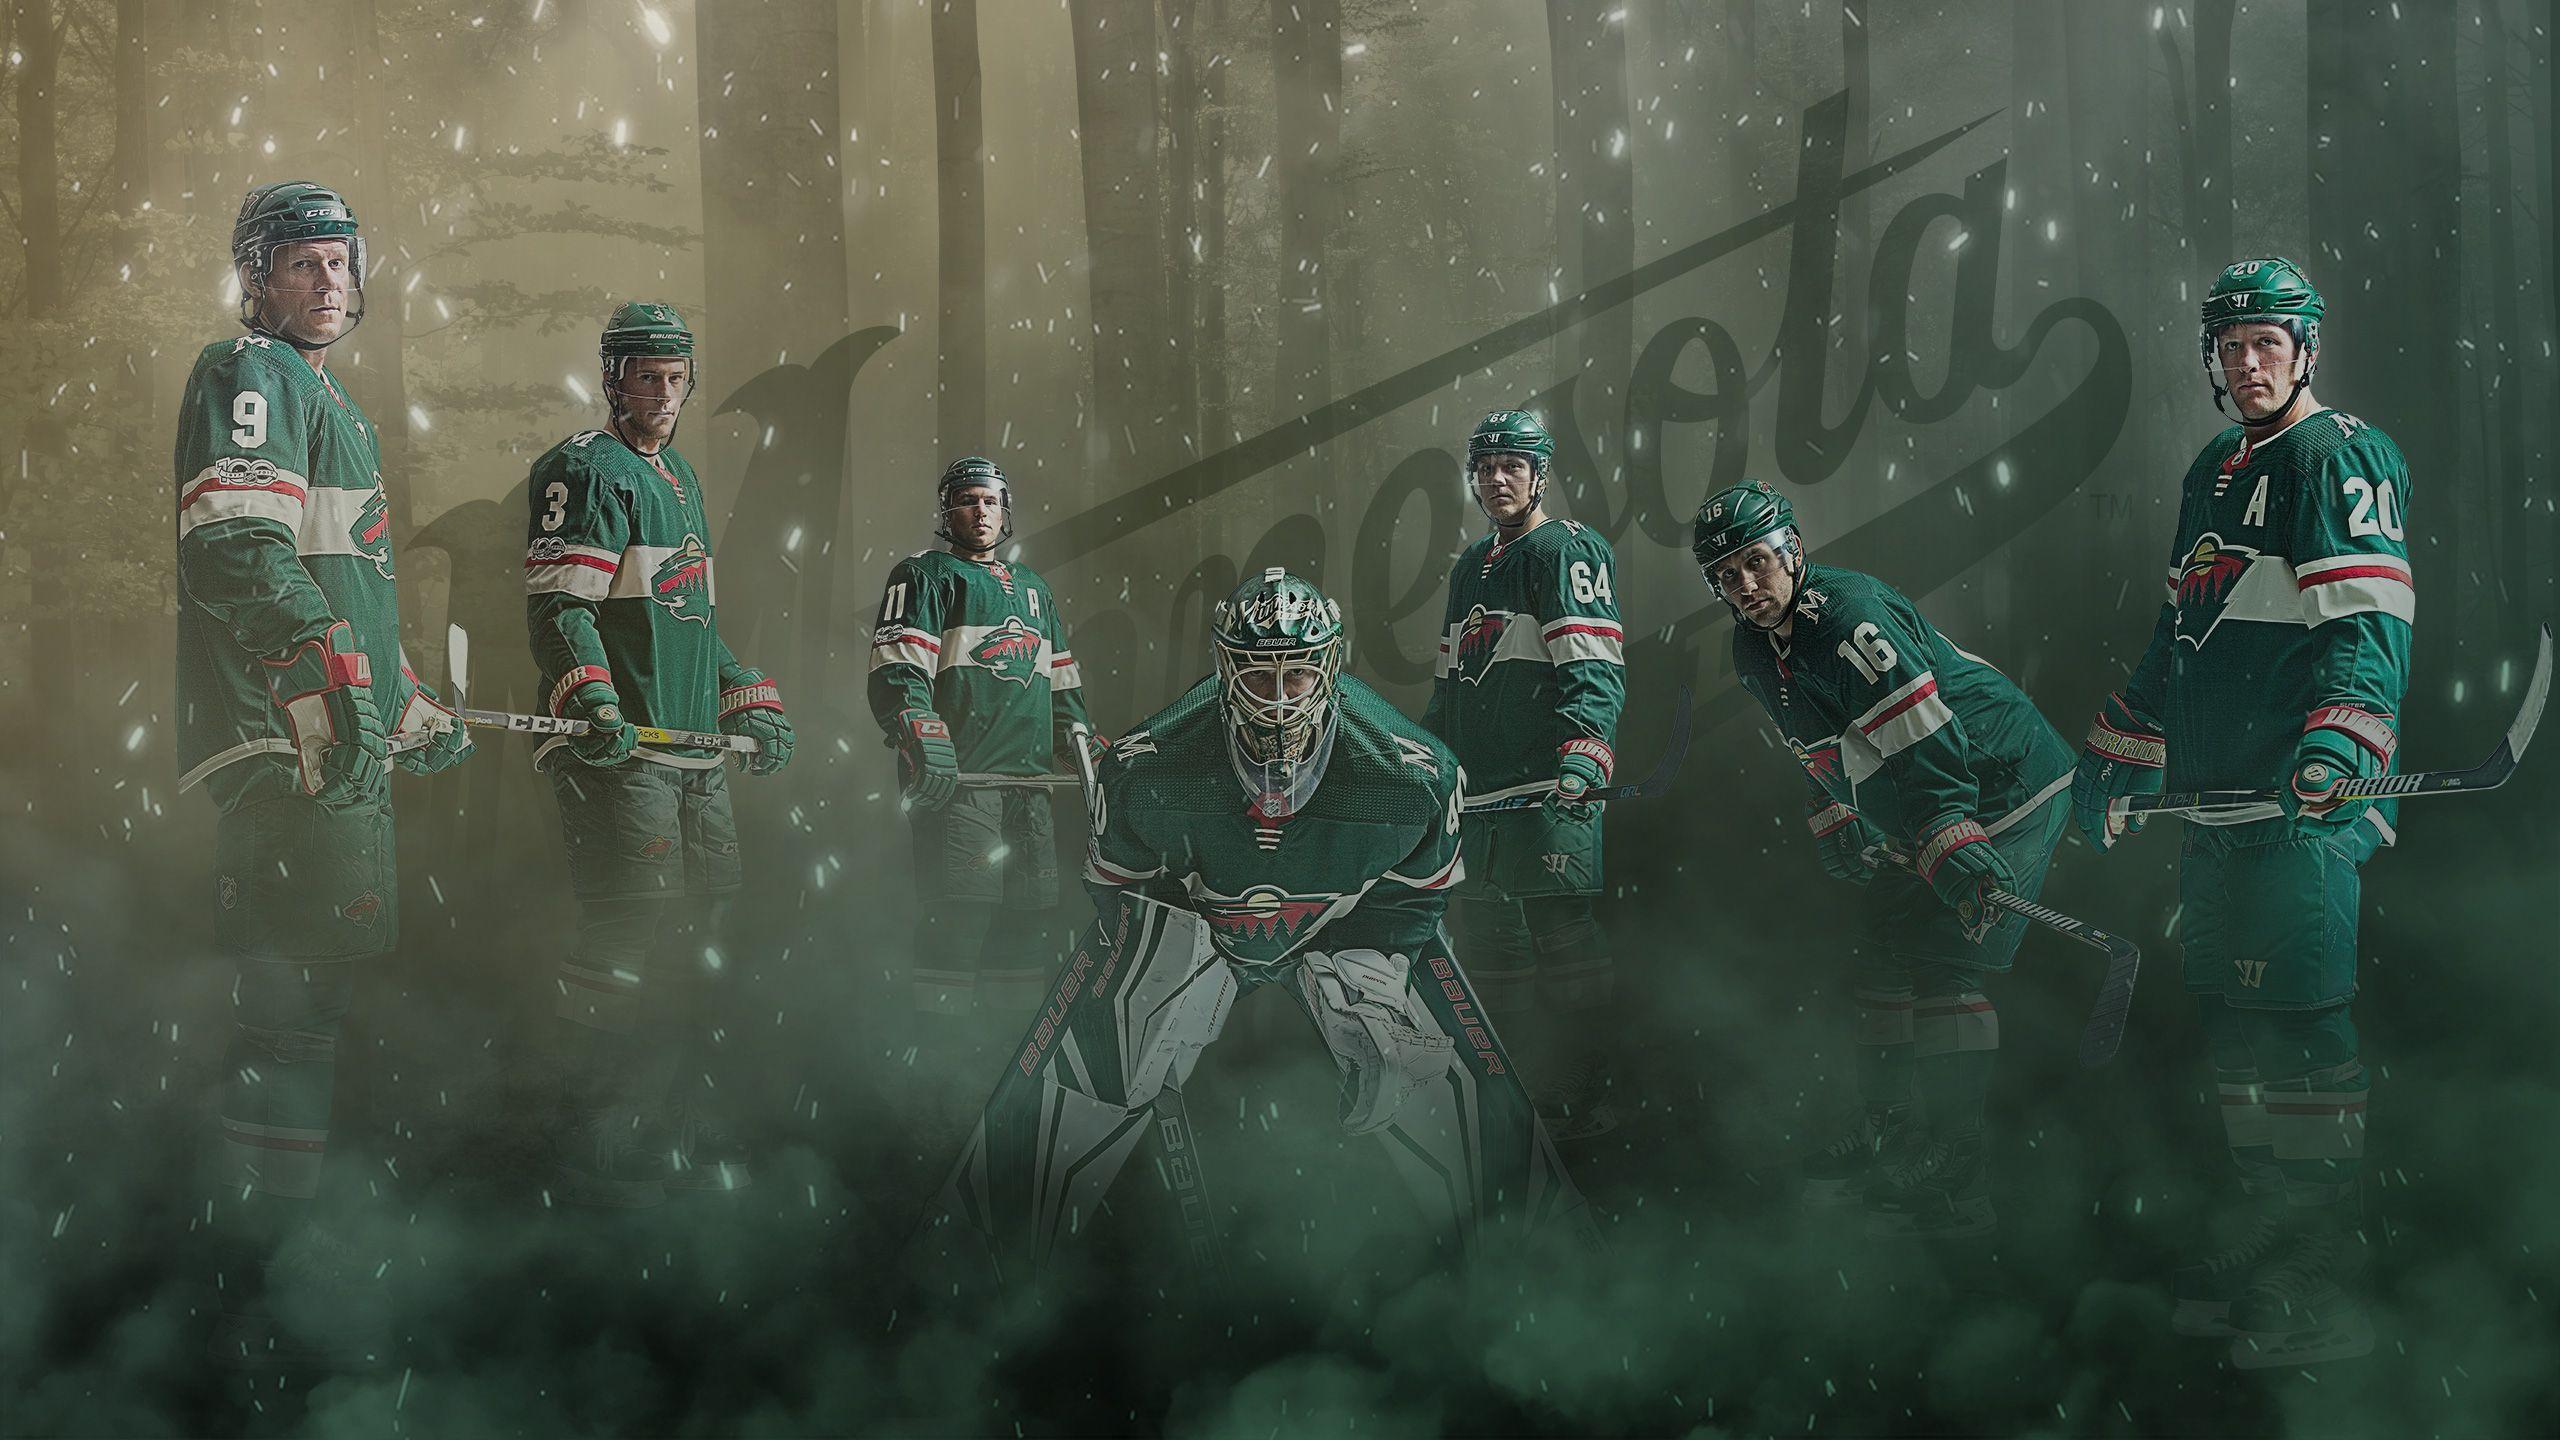 Minnesota Wild on X: It's #WallpaperWednesday time! Looking for more  wallpapers? ⇢  #mnwild  / X